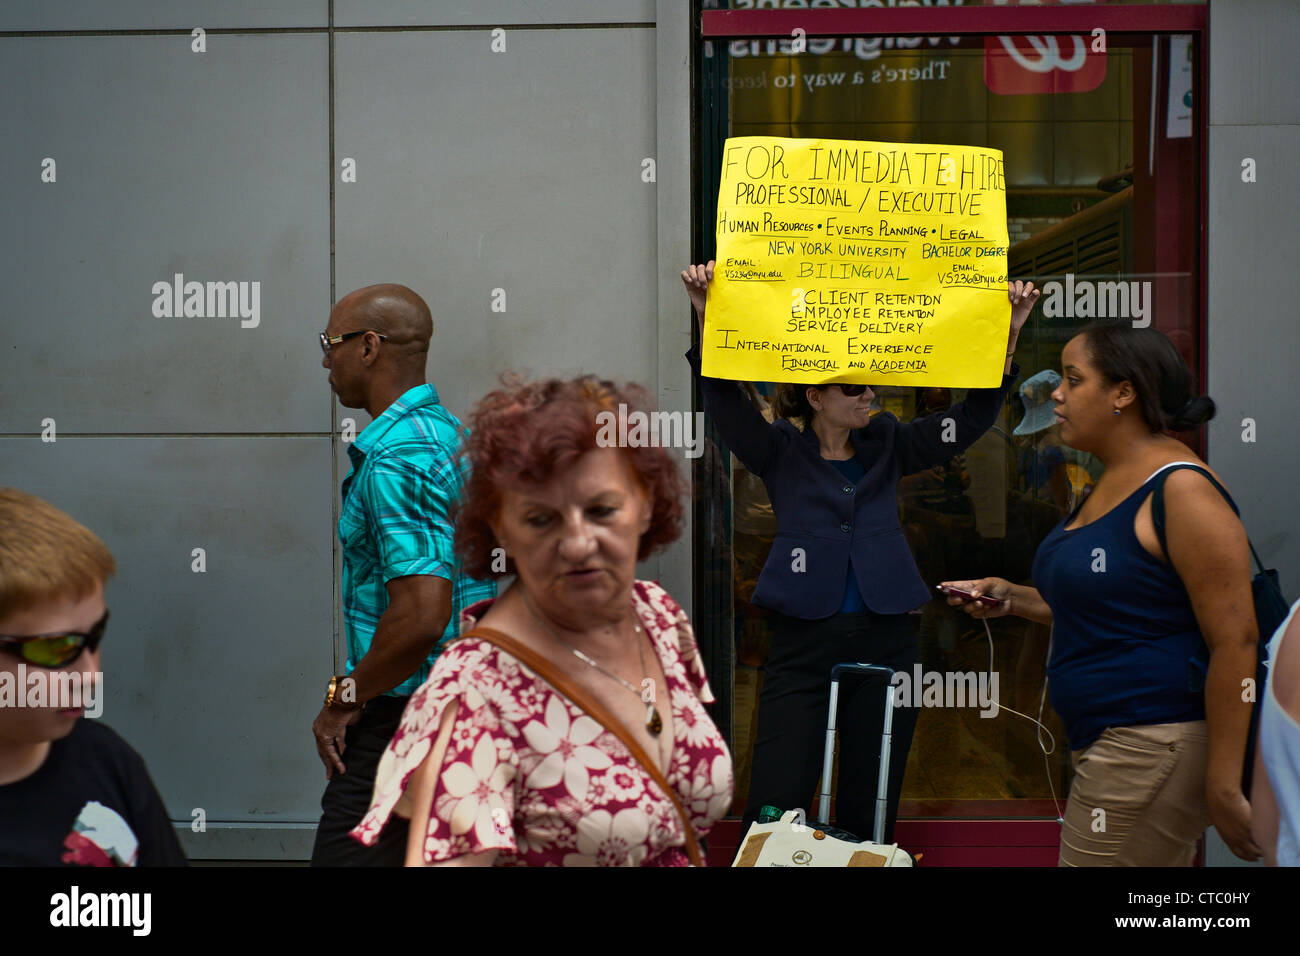 People pass by as Vilmarie Santos, who says she is unemployed, holds a sign seeking work, near Times Square, New York, NY, US Stock Photo